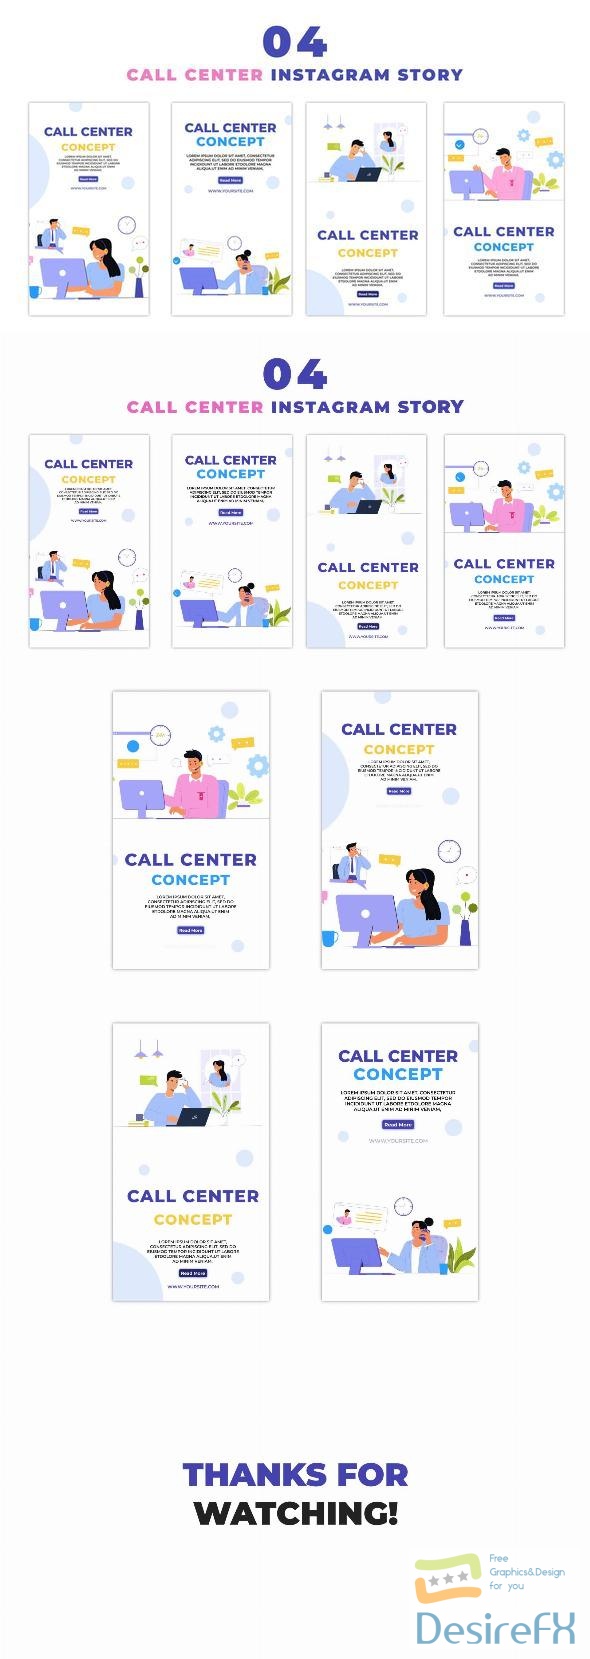 VideoHive Call Center Concept 2D Characters Instagram Story 47439458